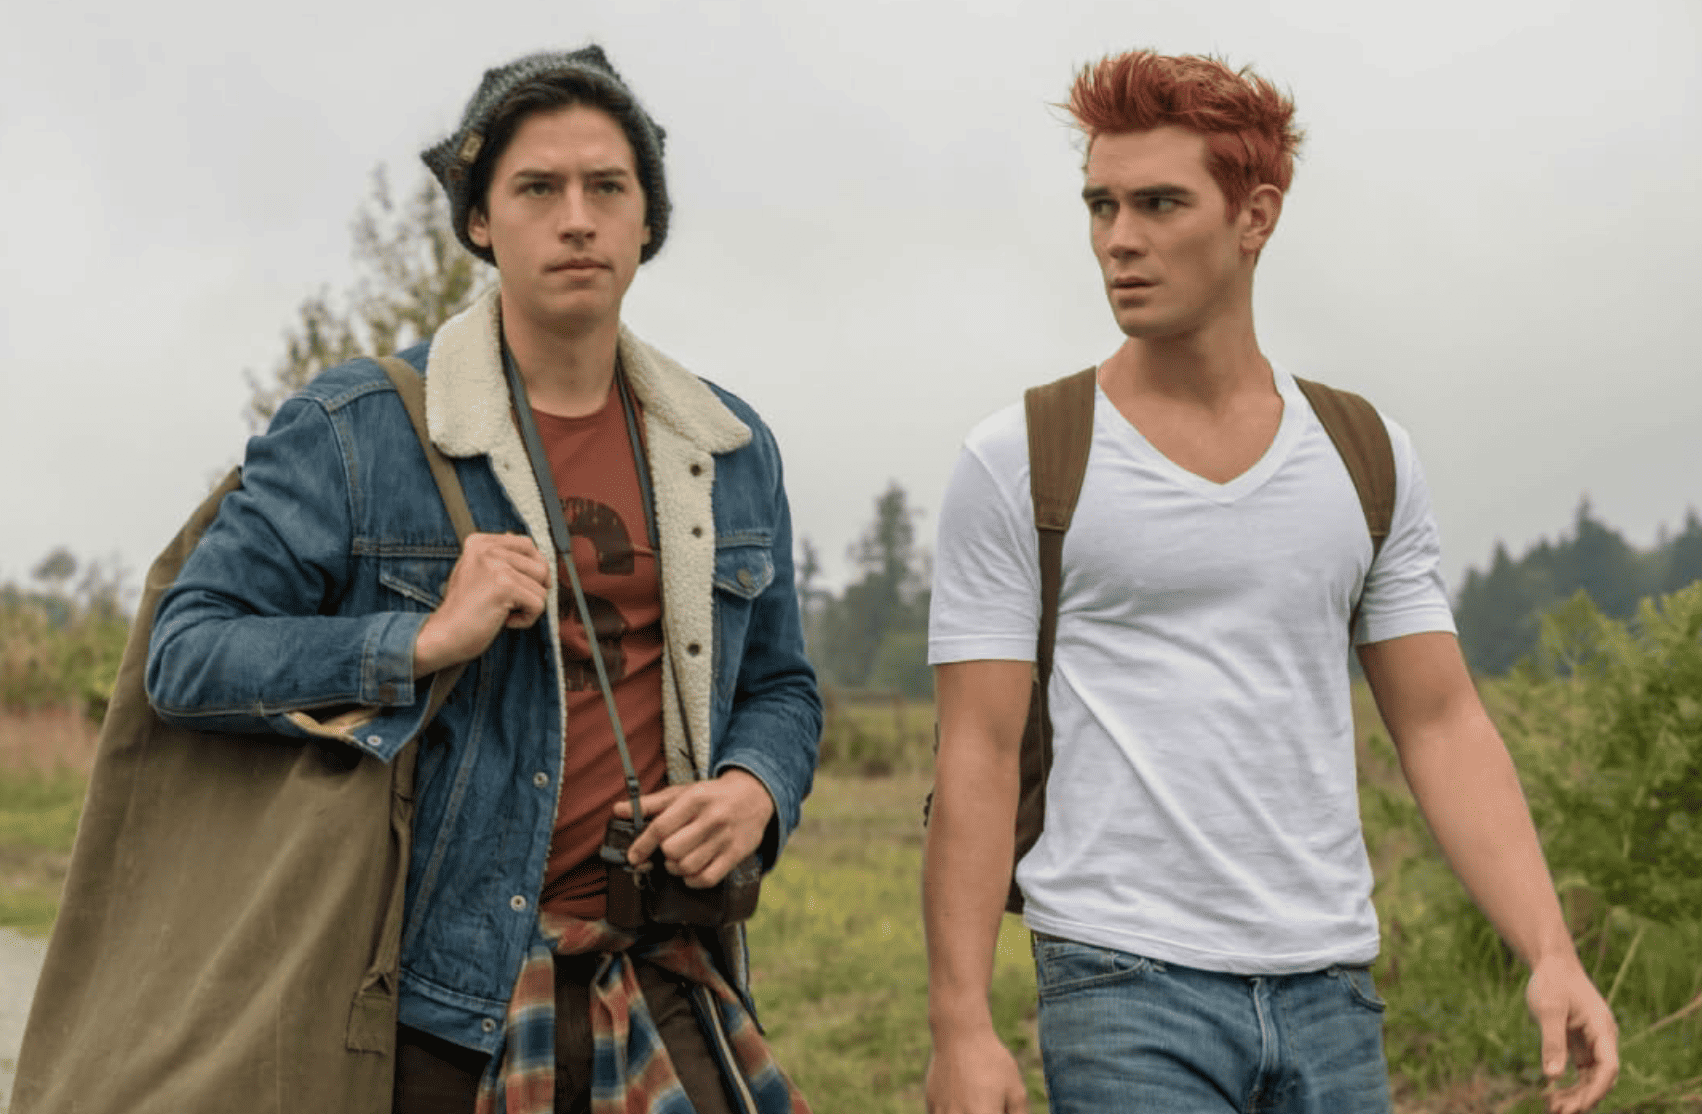 Cole Sprouse and K.J. Apa as Jughead and Archie, respectively, walk through a field in this image from Berlanti Productions.